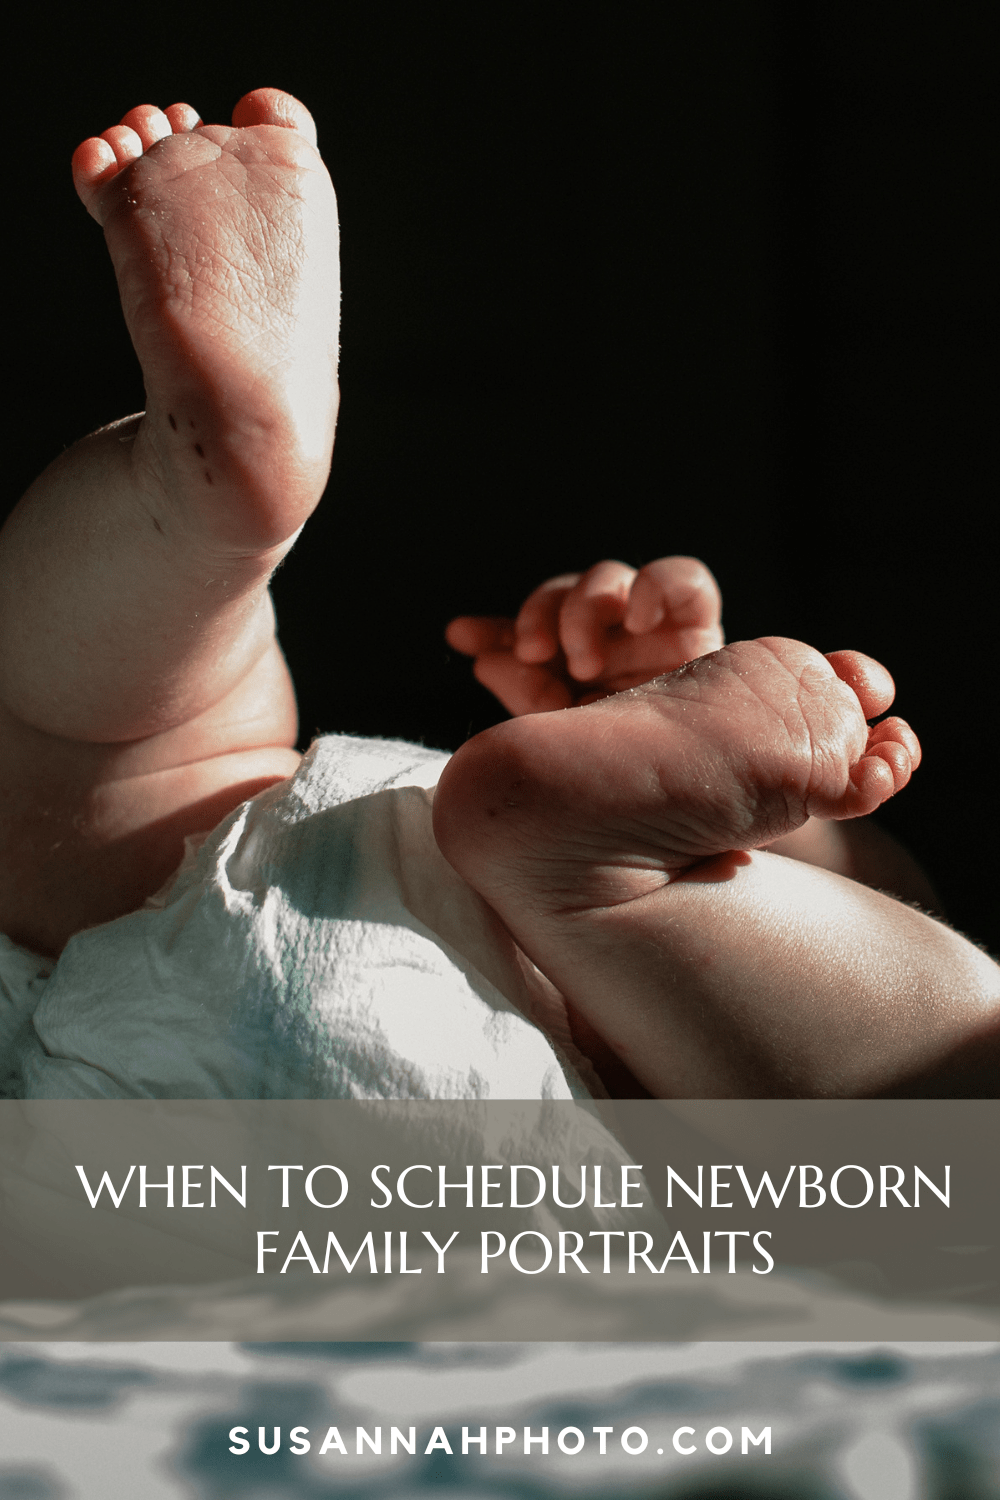 image of tiny baby feet with text over photo that reads "when to schedule newborn family portraits"